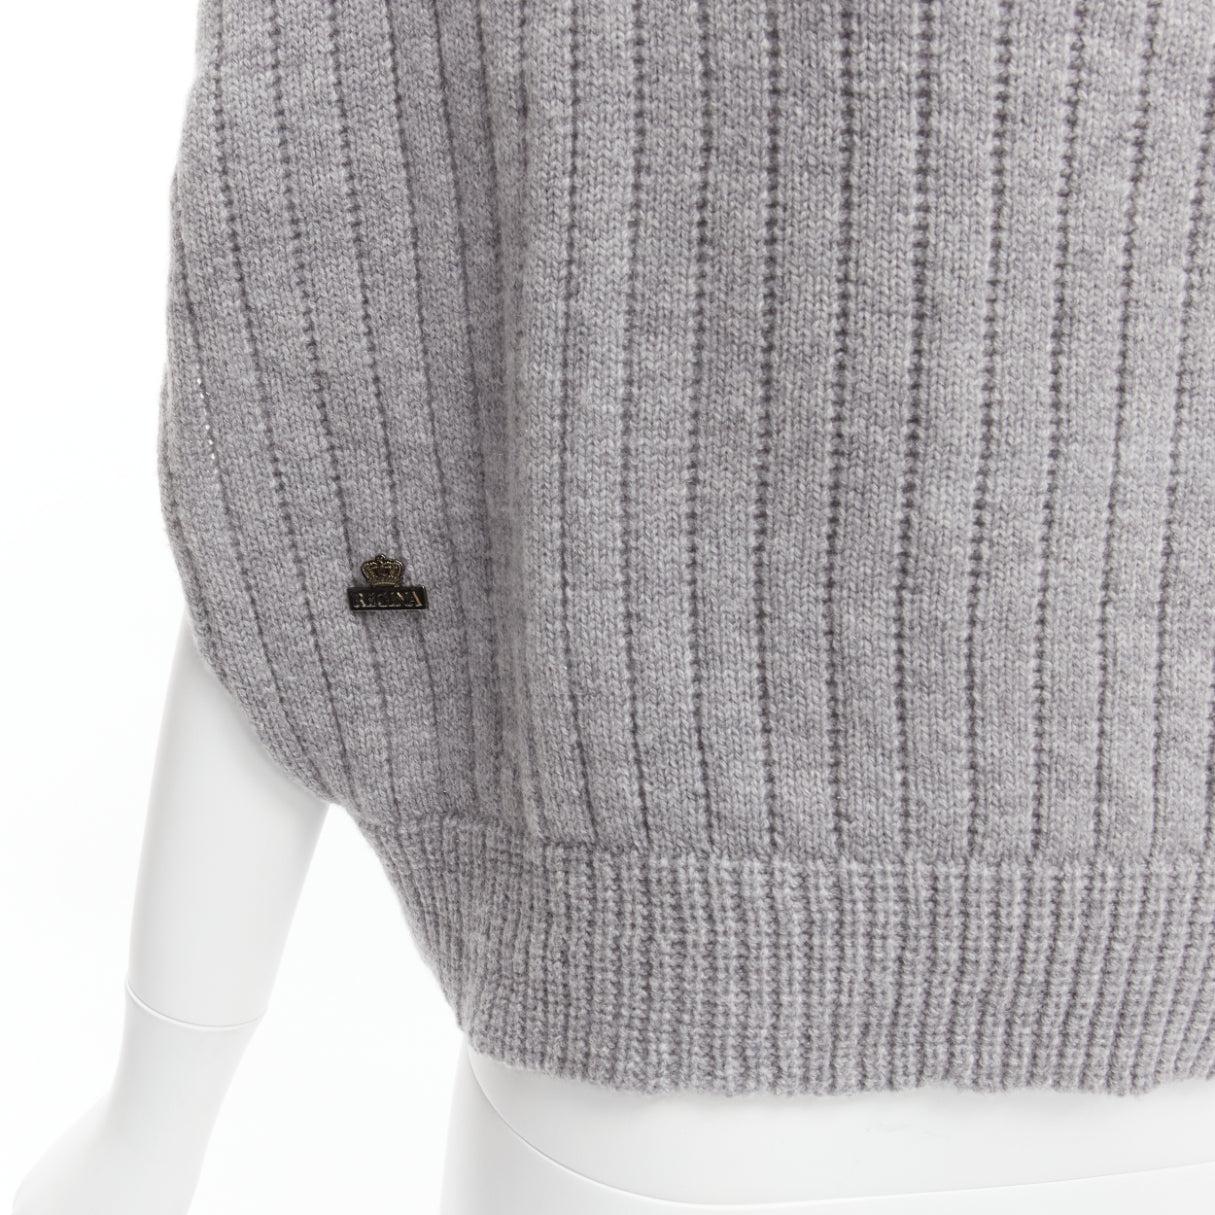 REGINA grey fur trimmed collar cashmere merino wool knitted poncho sweater US0 XS
Reference: SNKO/A00380
Brand: Regina
Material: Cashmere, Merino Wool, Fur
Color: Grey
Pattern: Solid
Closure: Pullover
Extra Details: Brand logo on right front near